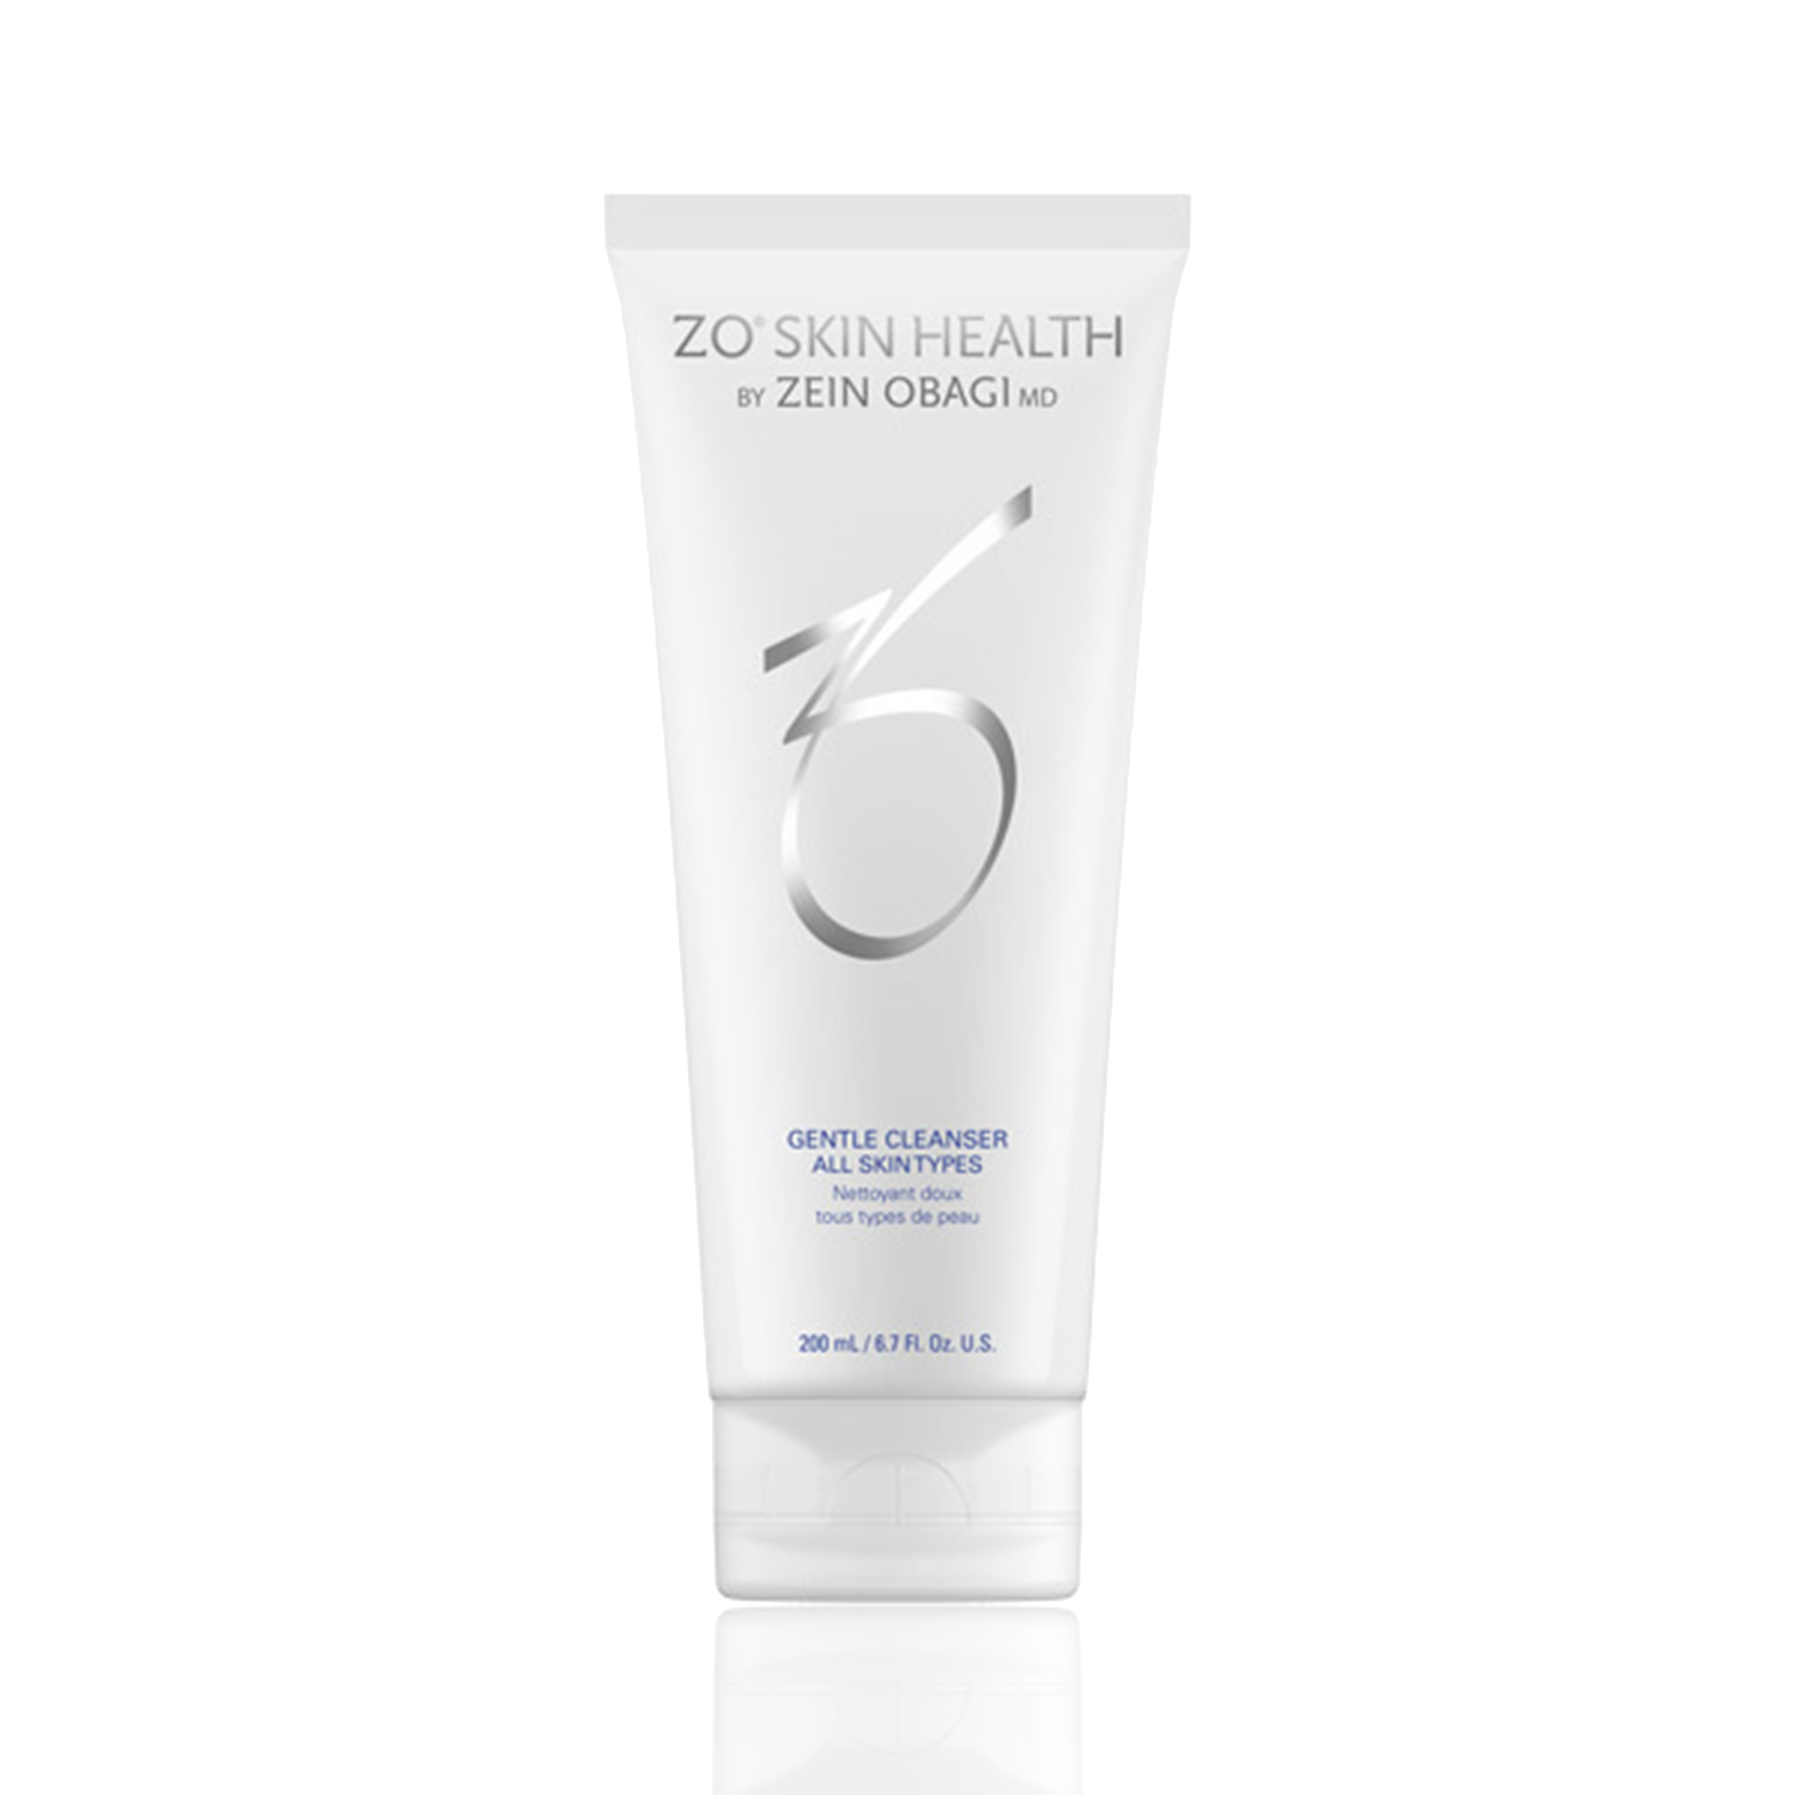 Zo skin cleanser. Zein Obagi Exfoliating Cleanser 60 мл. Zo Skin 10% Vitamin c self-activating. Zo Skin Health Hydrating Cleanser Control. Эксфолиант умывалка обаджи.